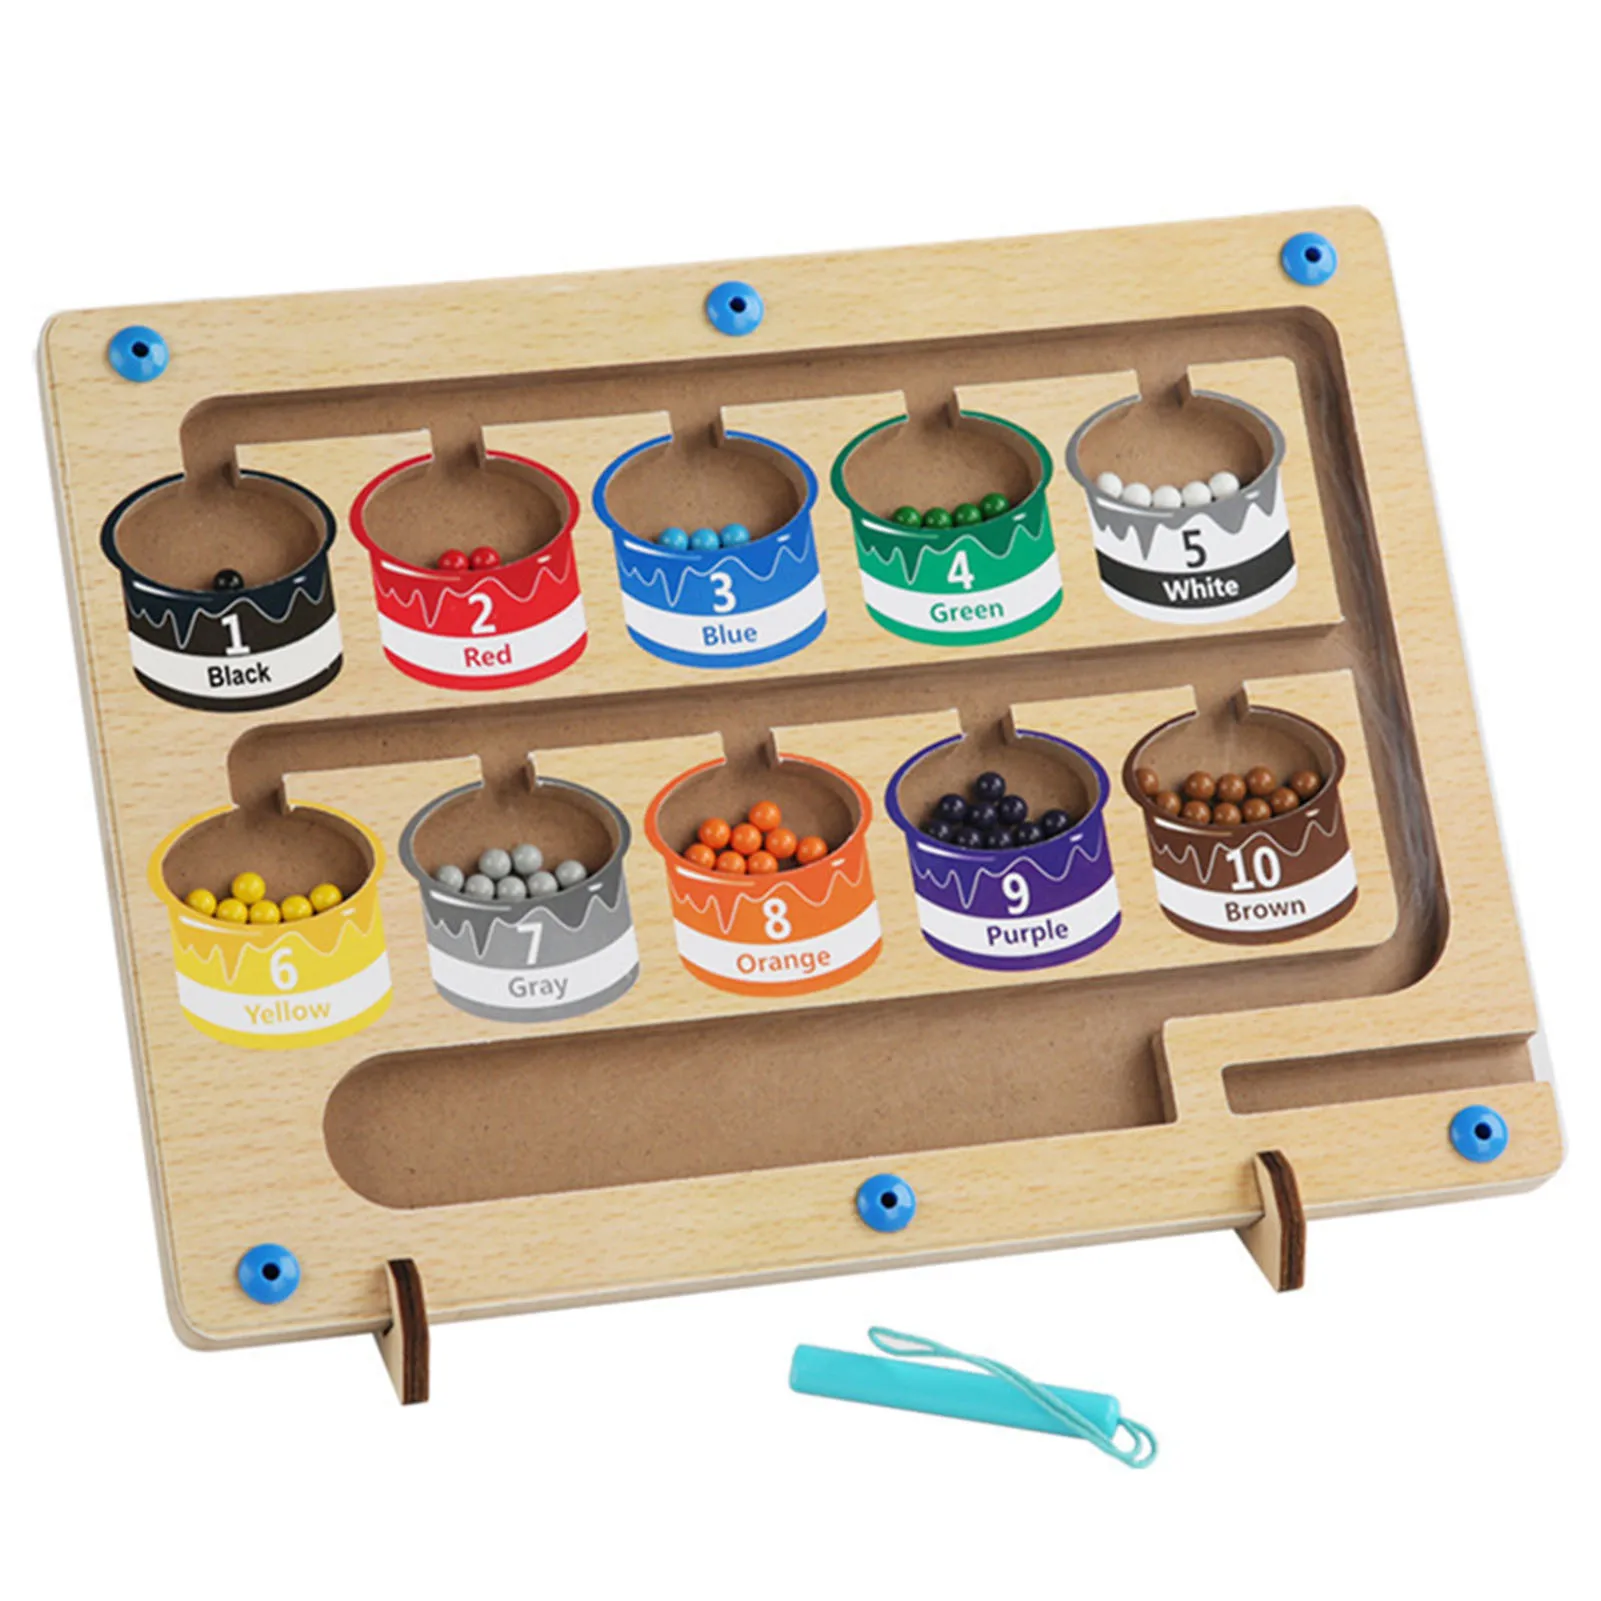 

Wooden Magnetic Counting Operation Toys Creative Intelligence Logic Training Blocks Toy for Boys Girls Early Learning Aids